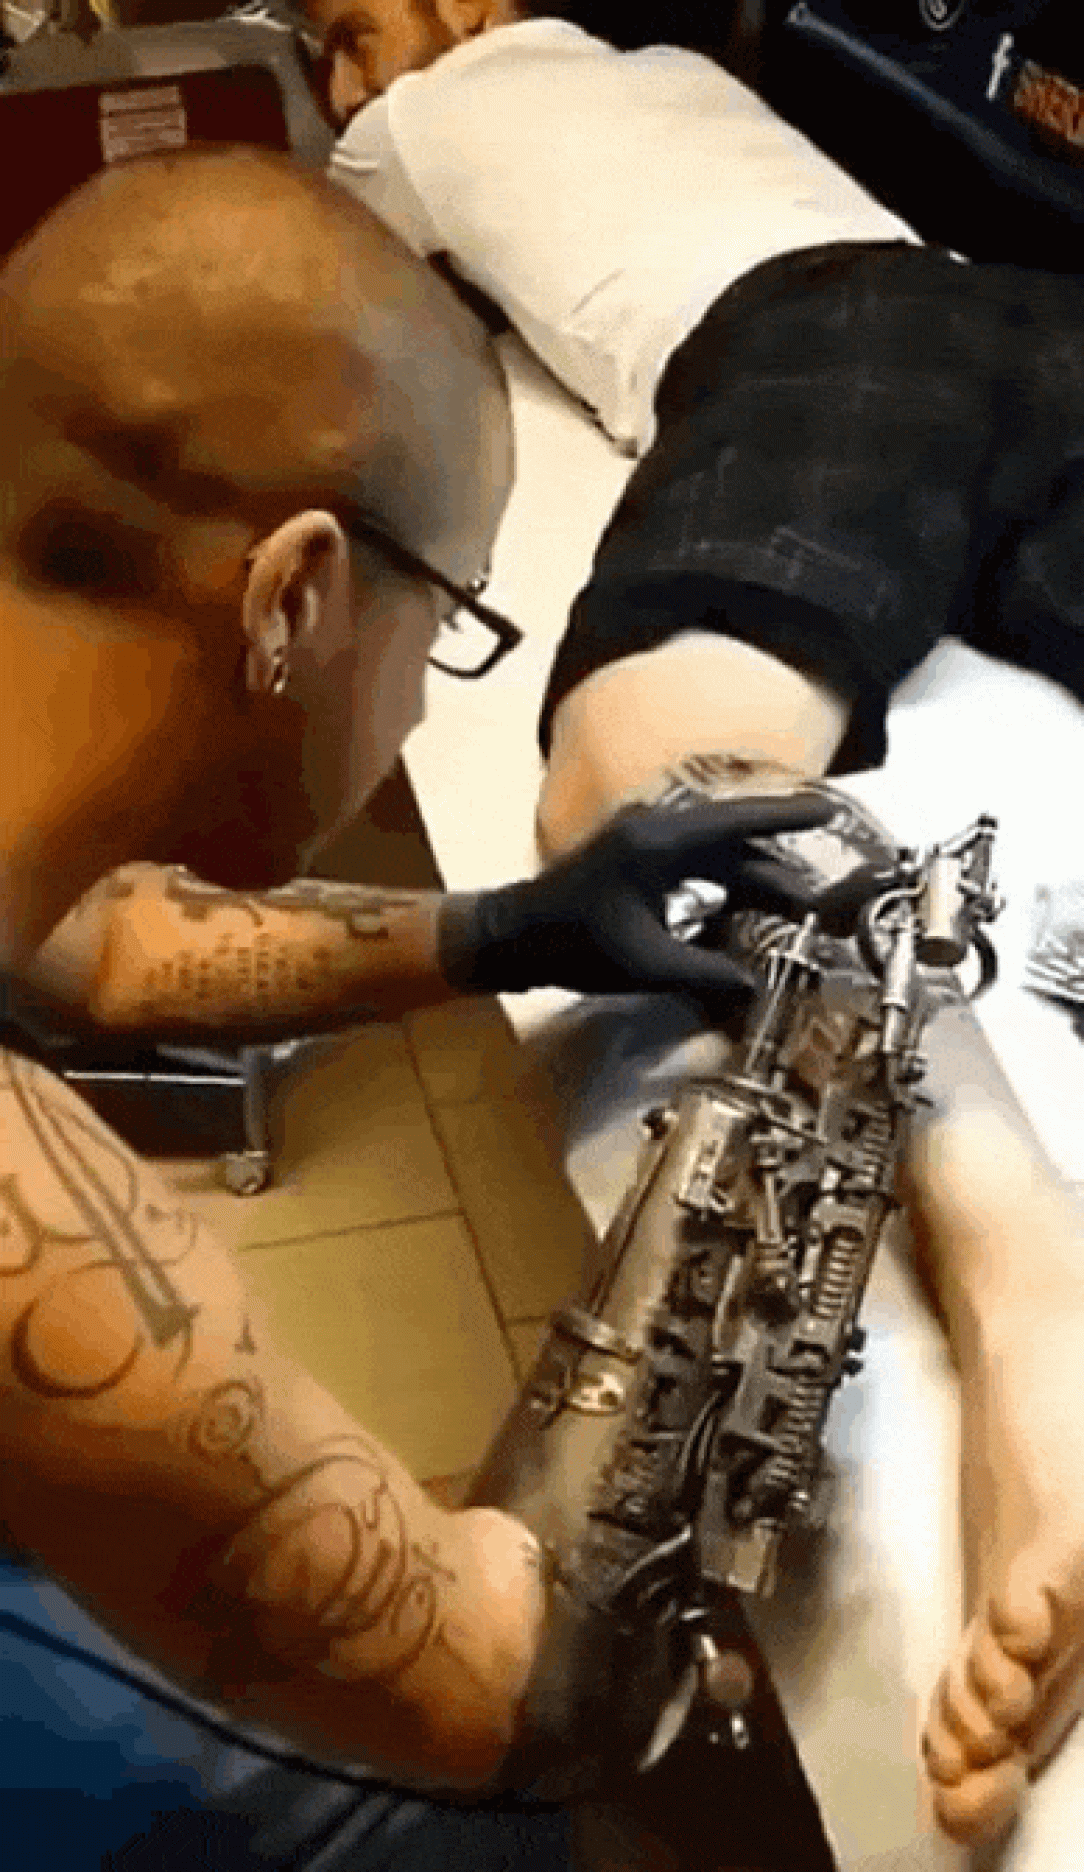 Bionic arm with great tattoo art 👍😮